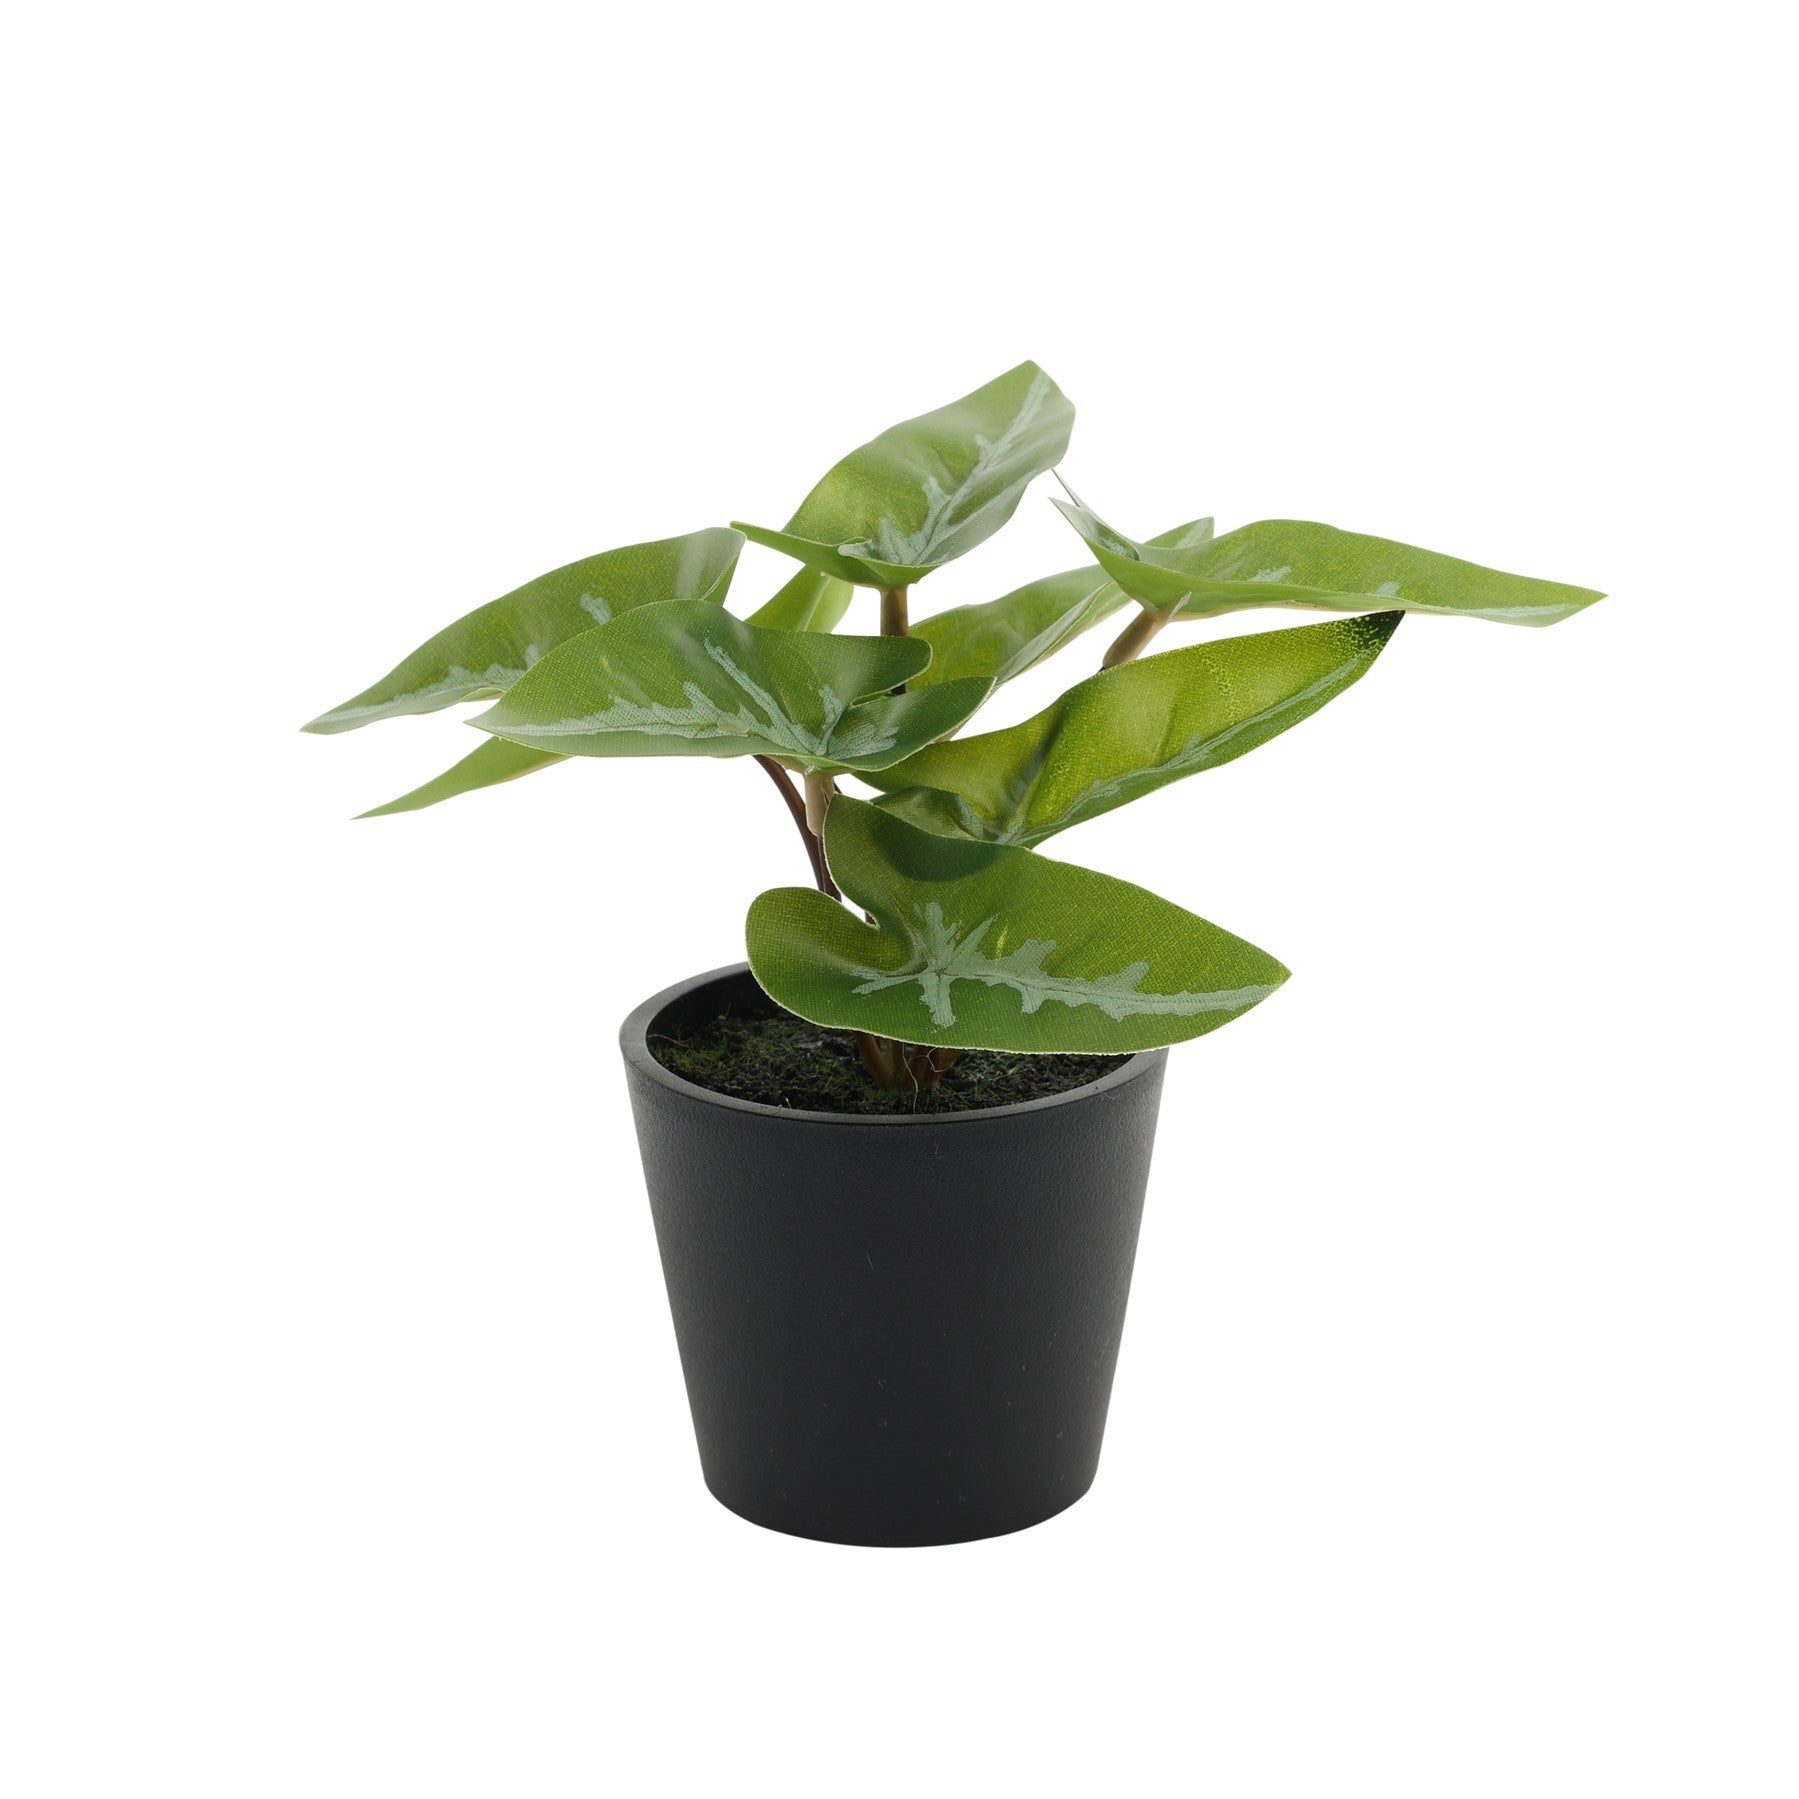 View Mini Syngonium Potted House Plant 13cm information